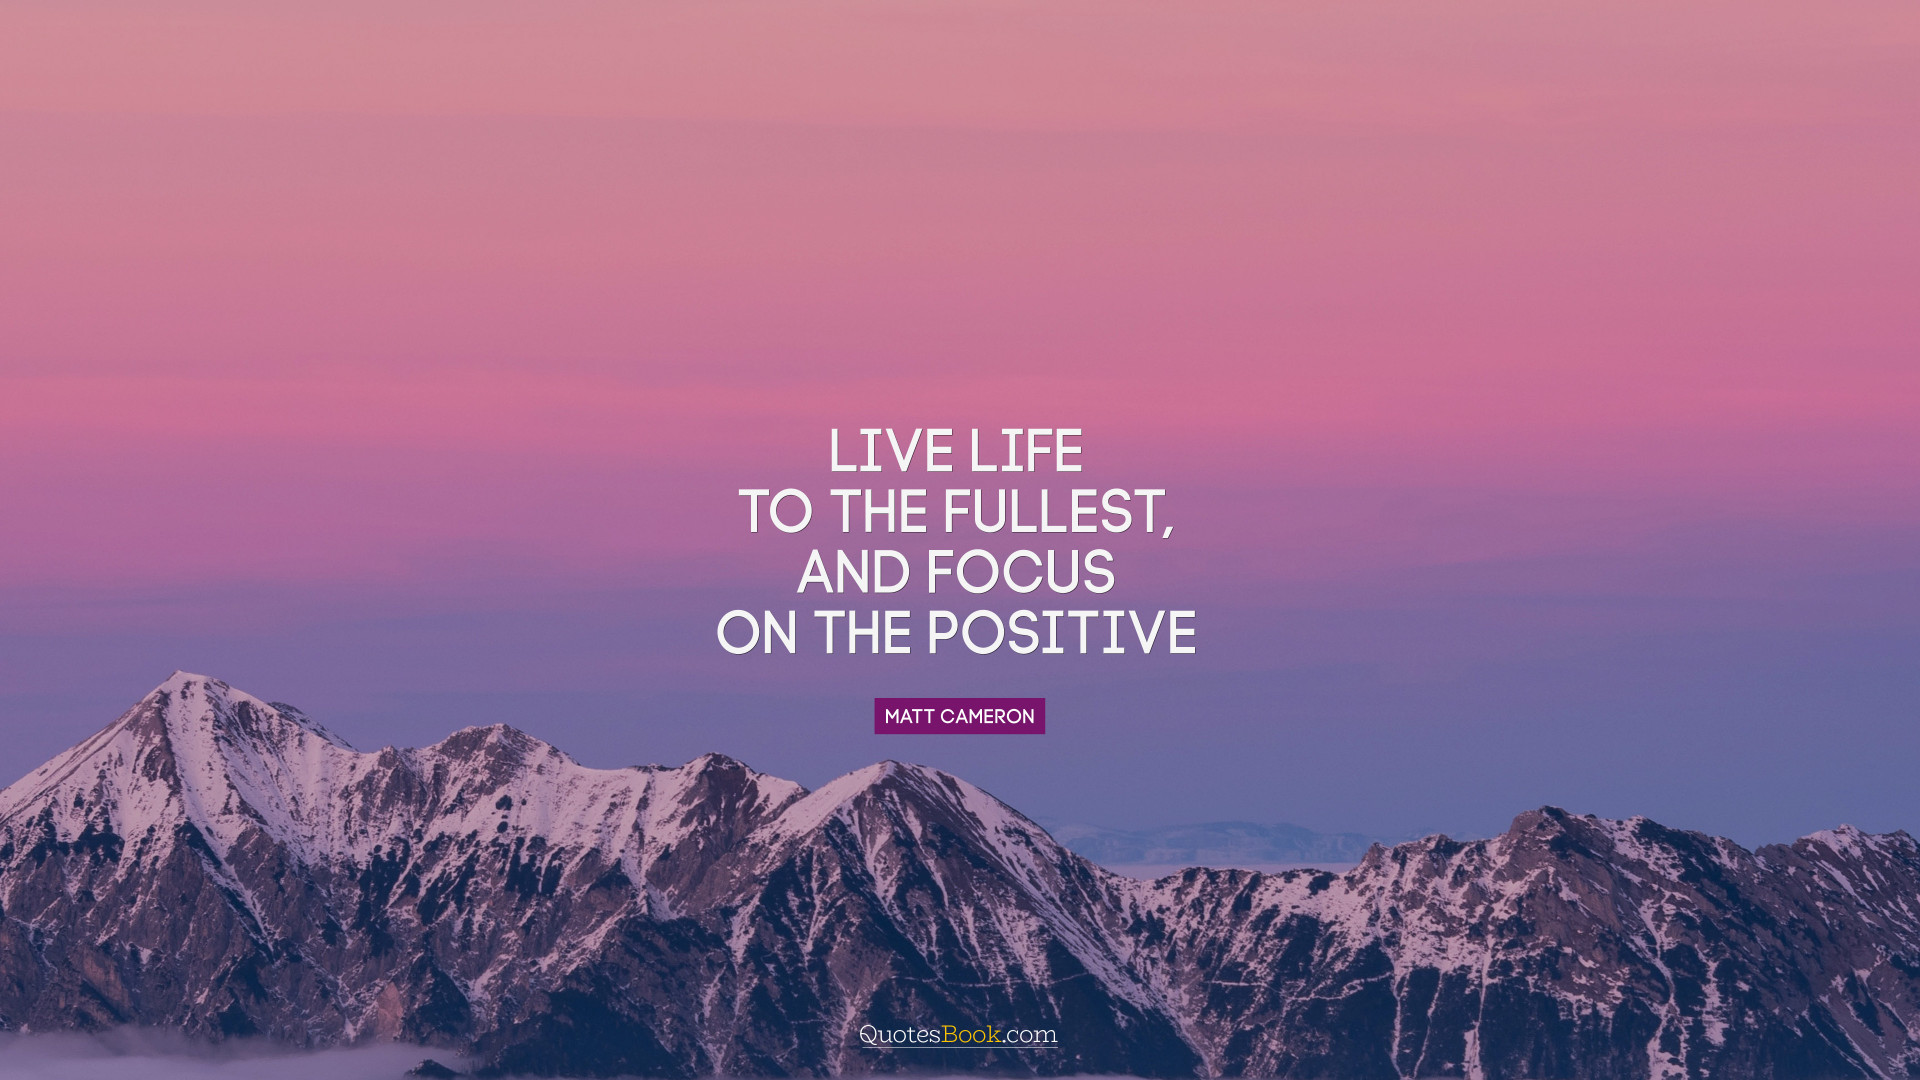 Live life to the fullest, and focus on the positive. - Quote by Matt